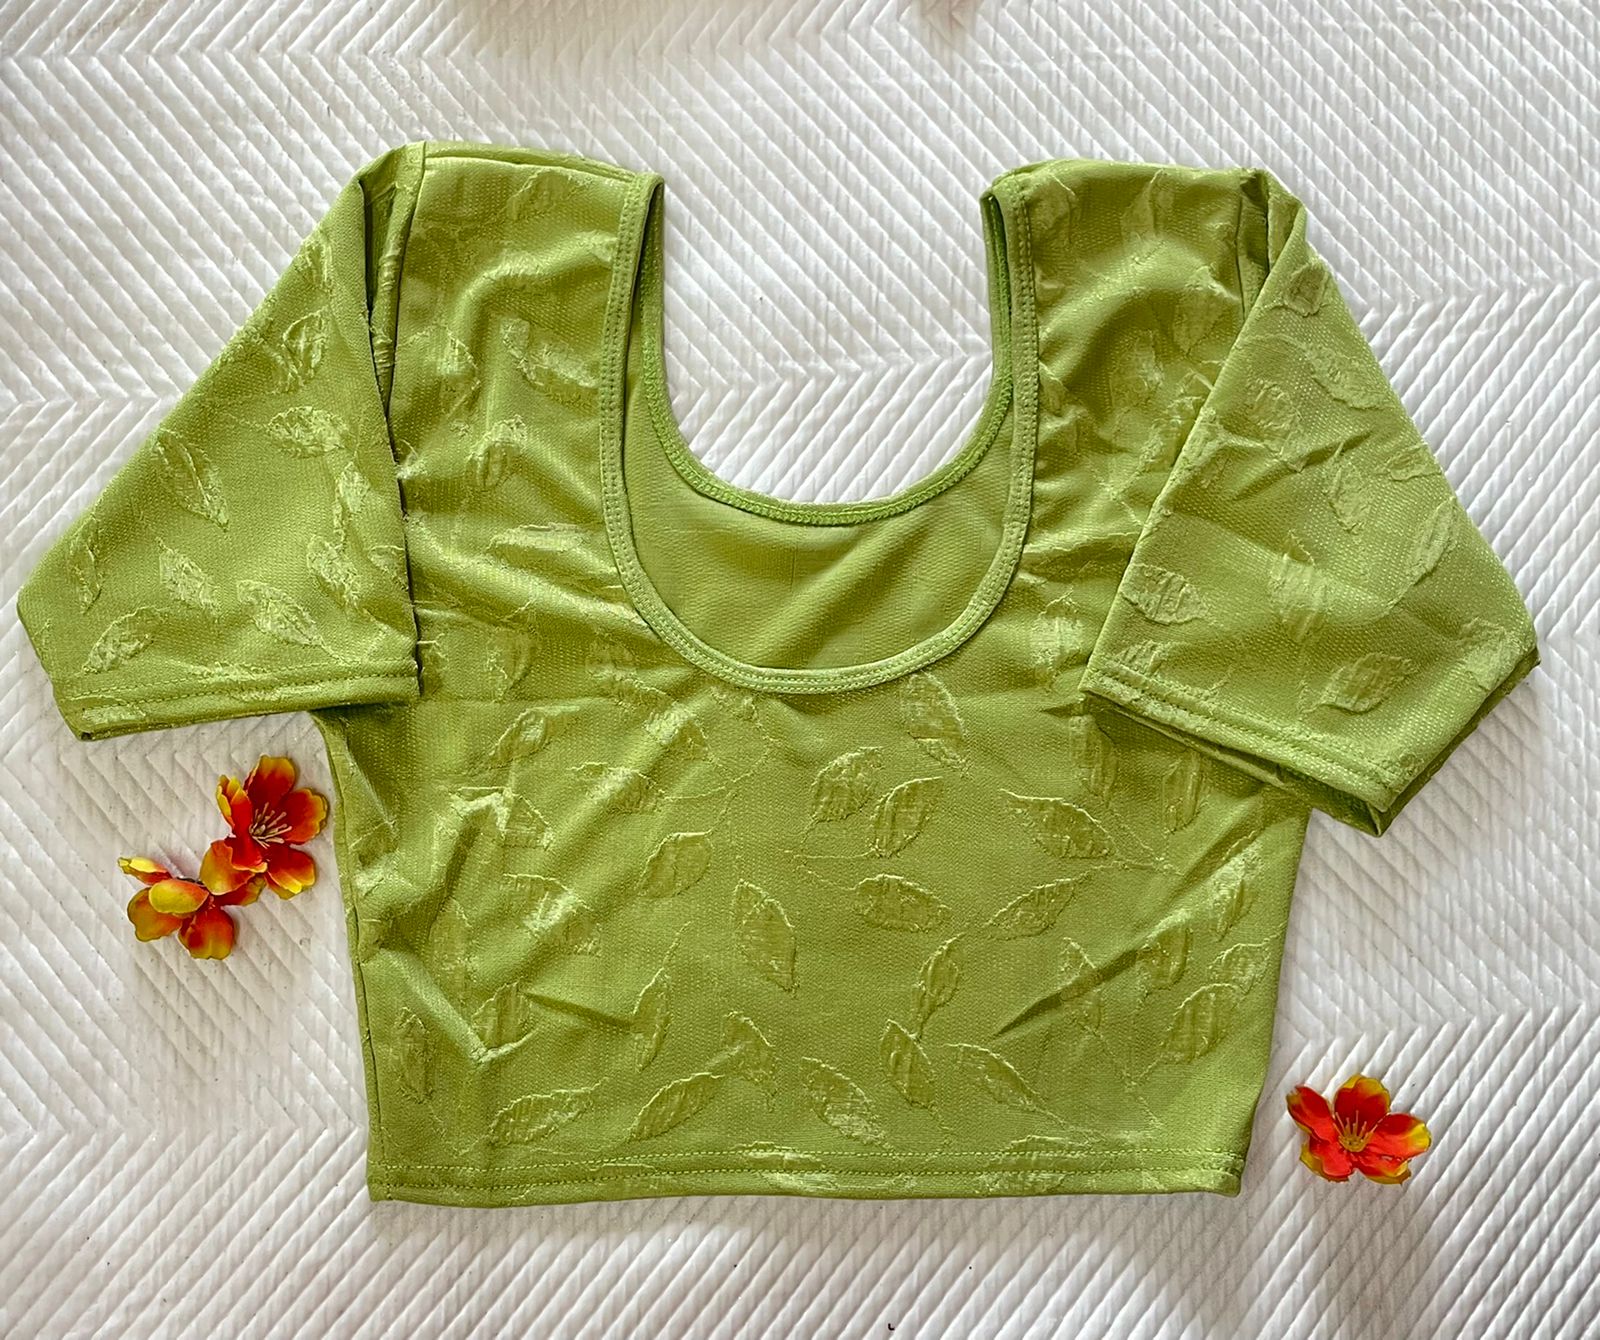 Light green stretchable hosiery blouse